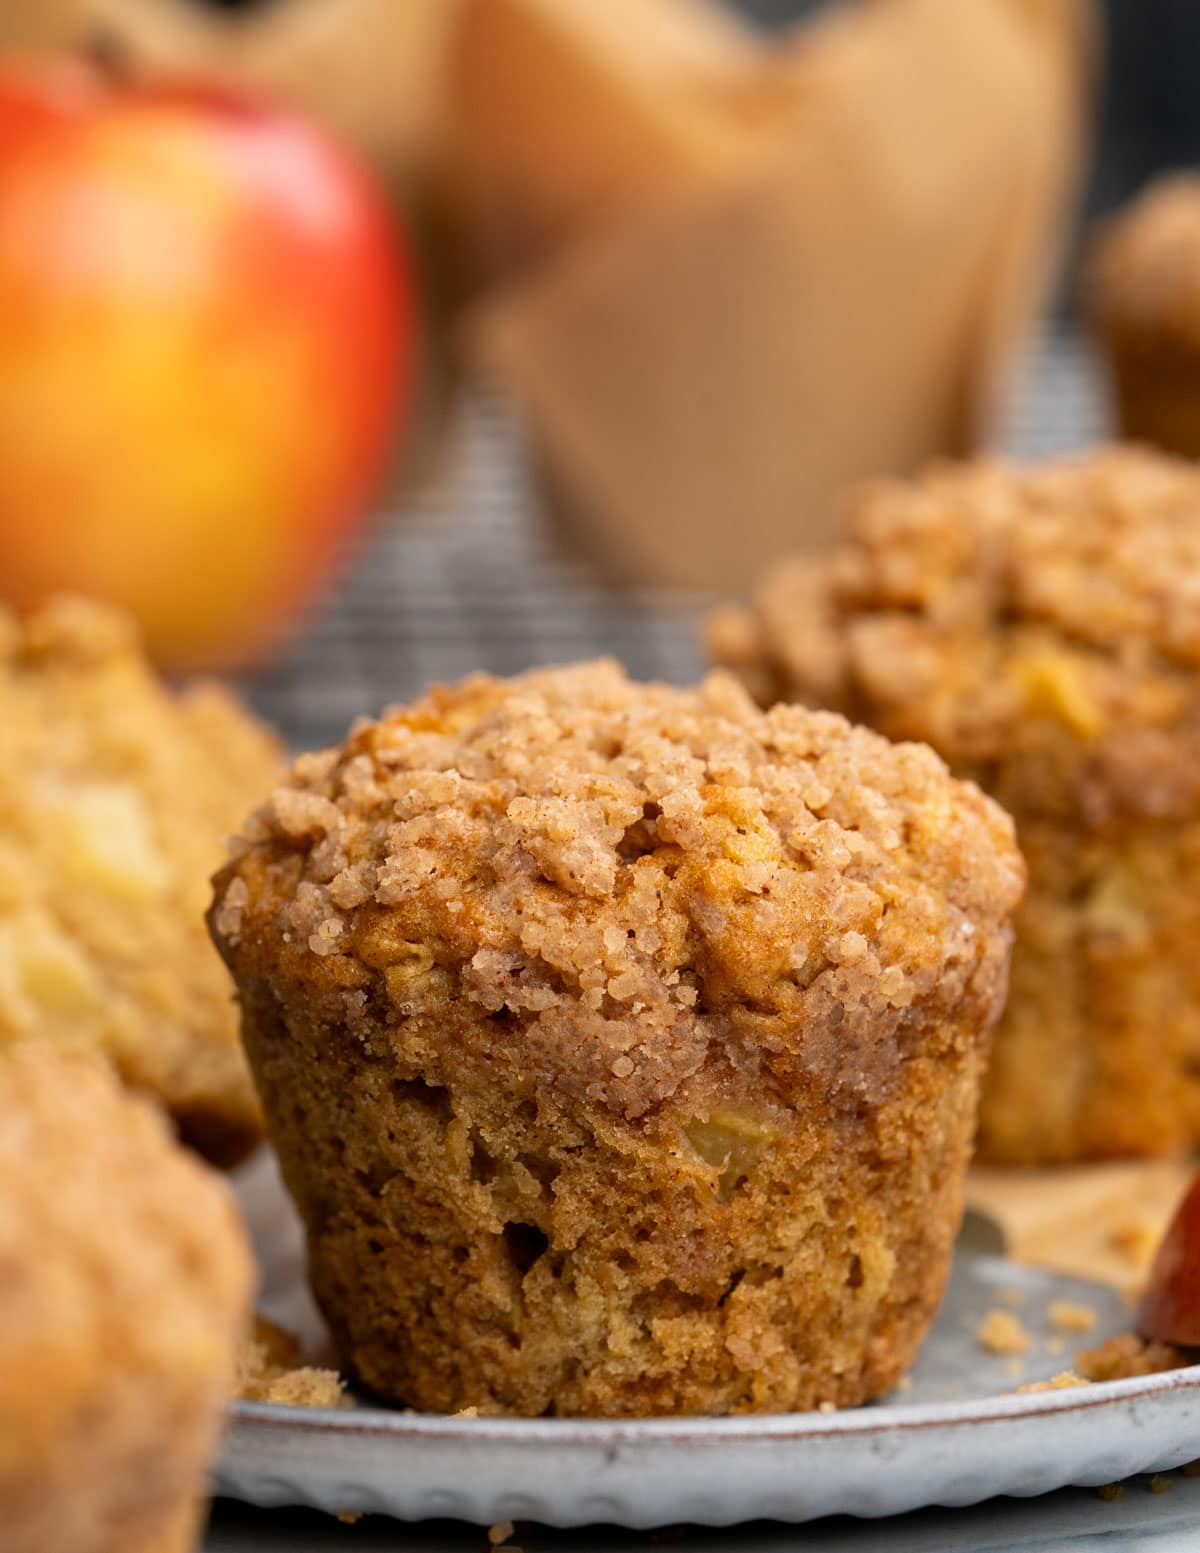 Tall Cinnamon apple muffin with crunchy cinnamon sugar topping. You can notice a chunk of apple on the side of the muffin.